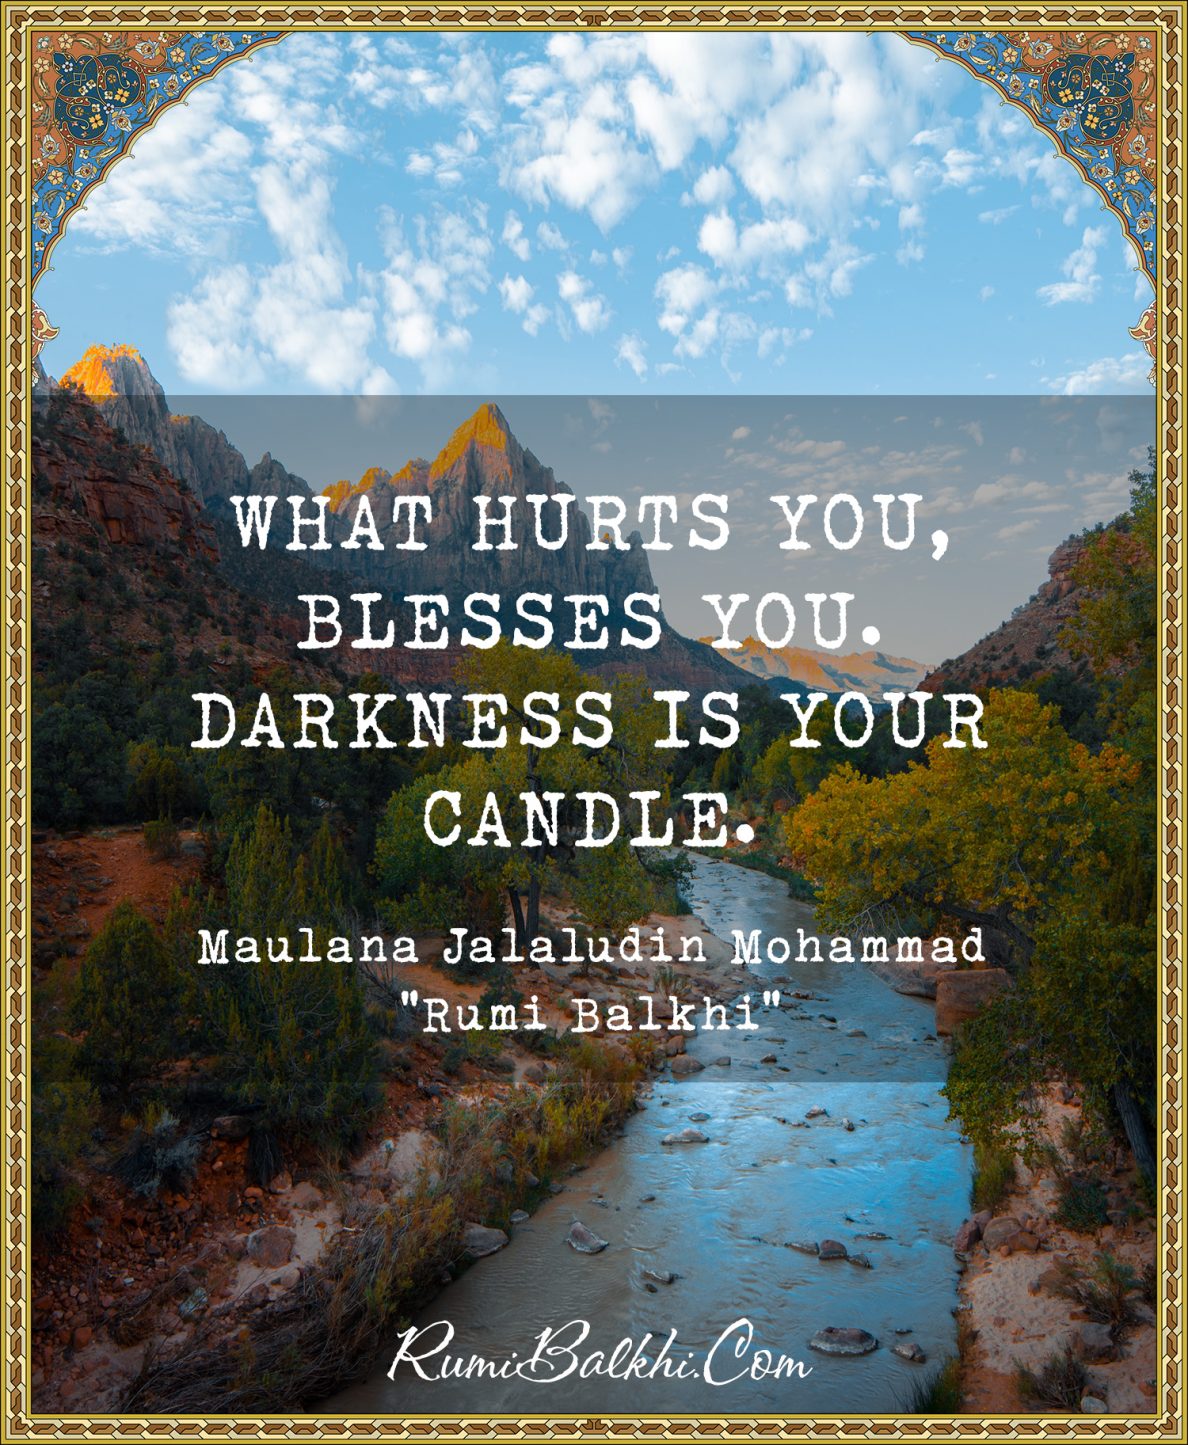 What hurts you, blesses you. Darkness is your candle (2)